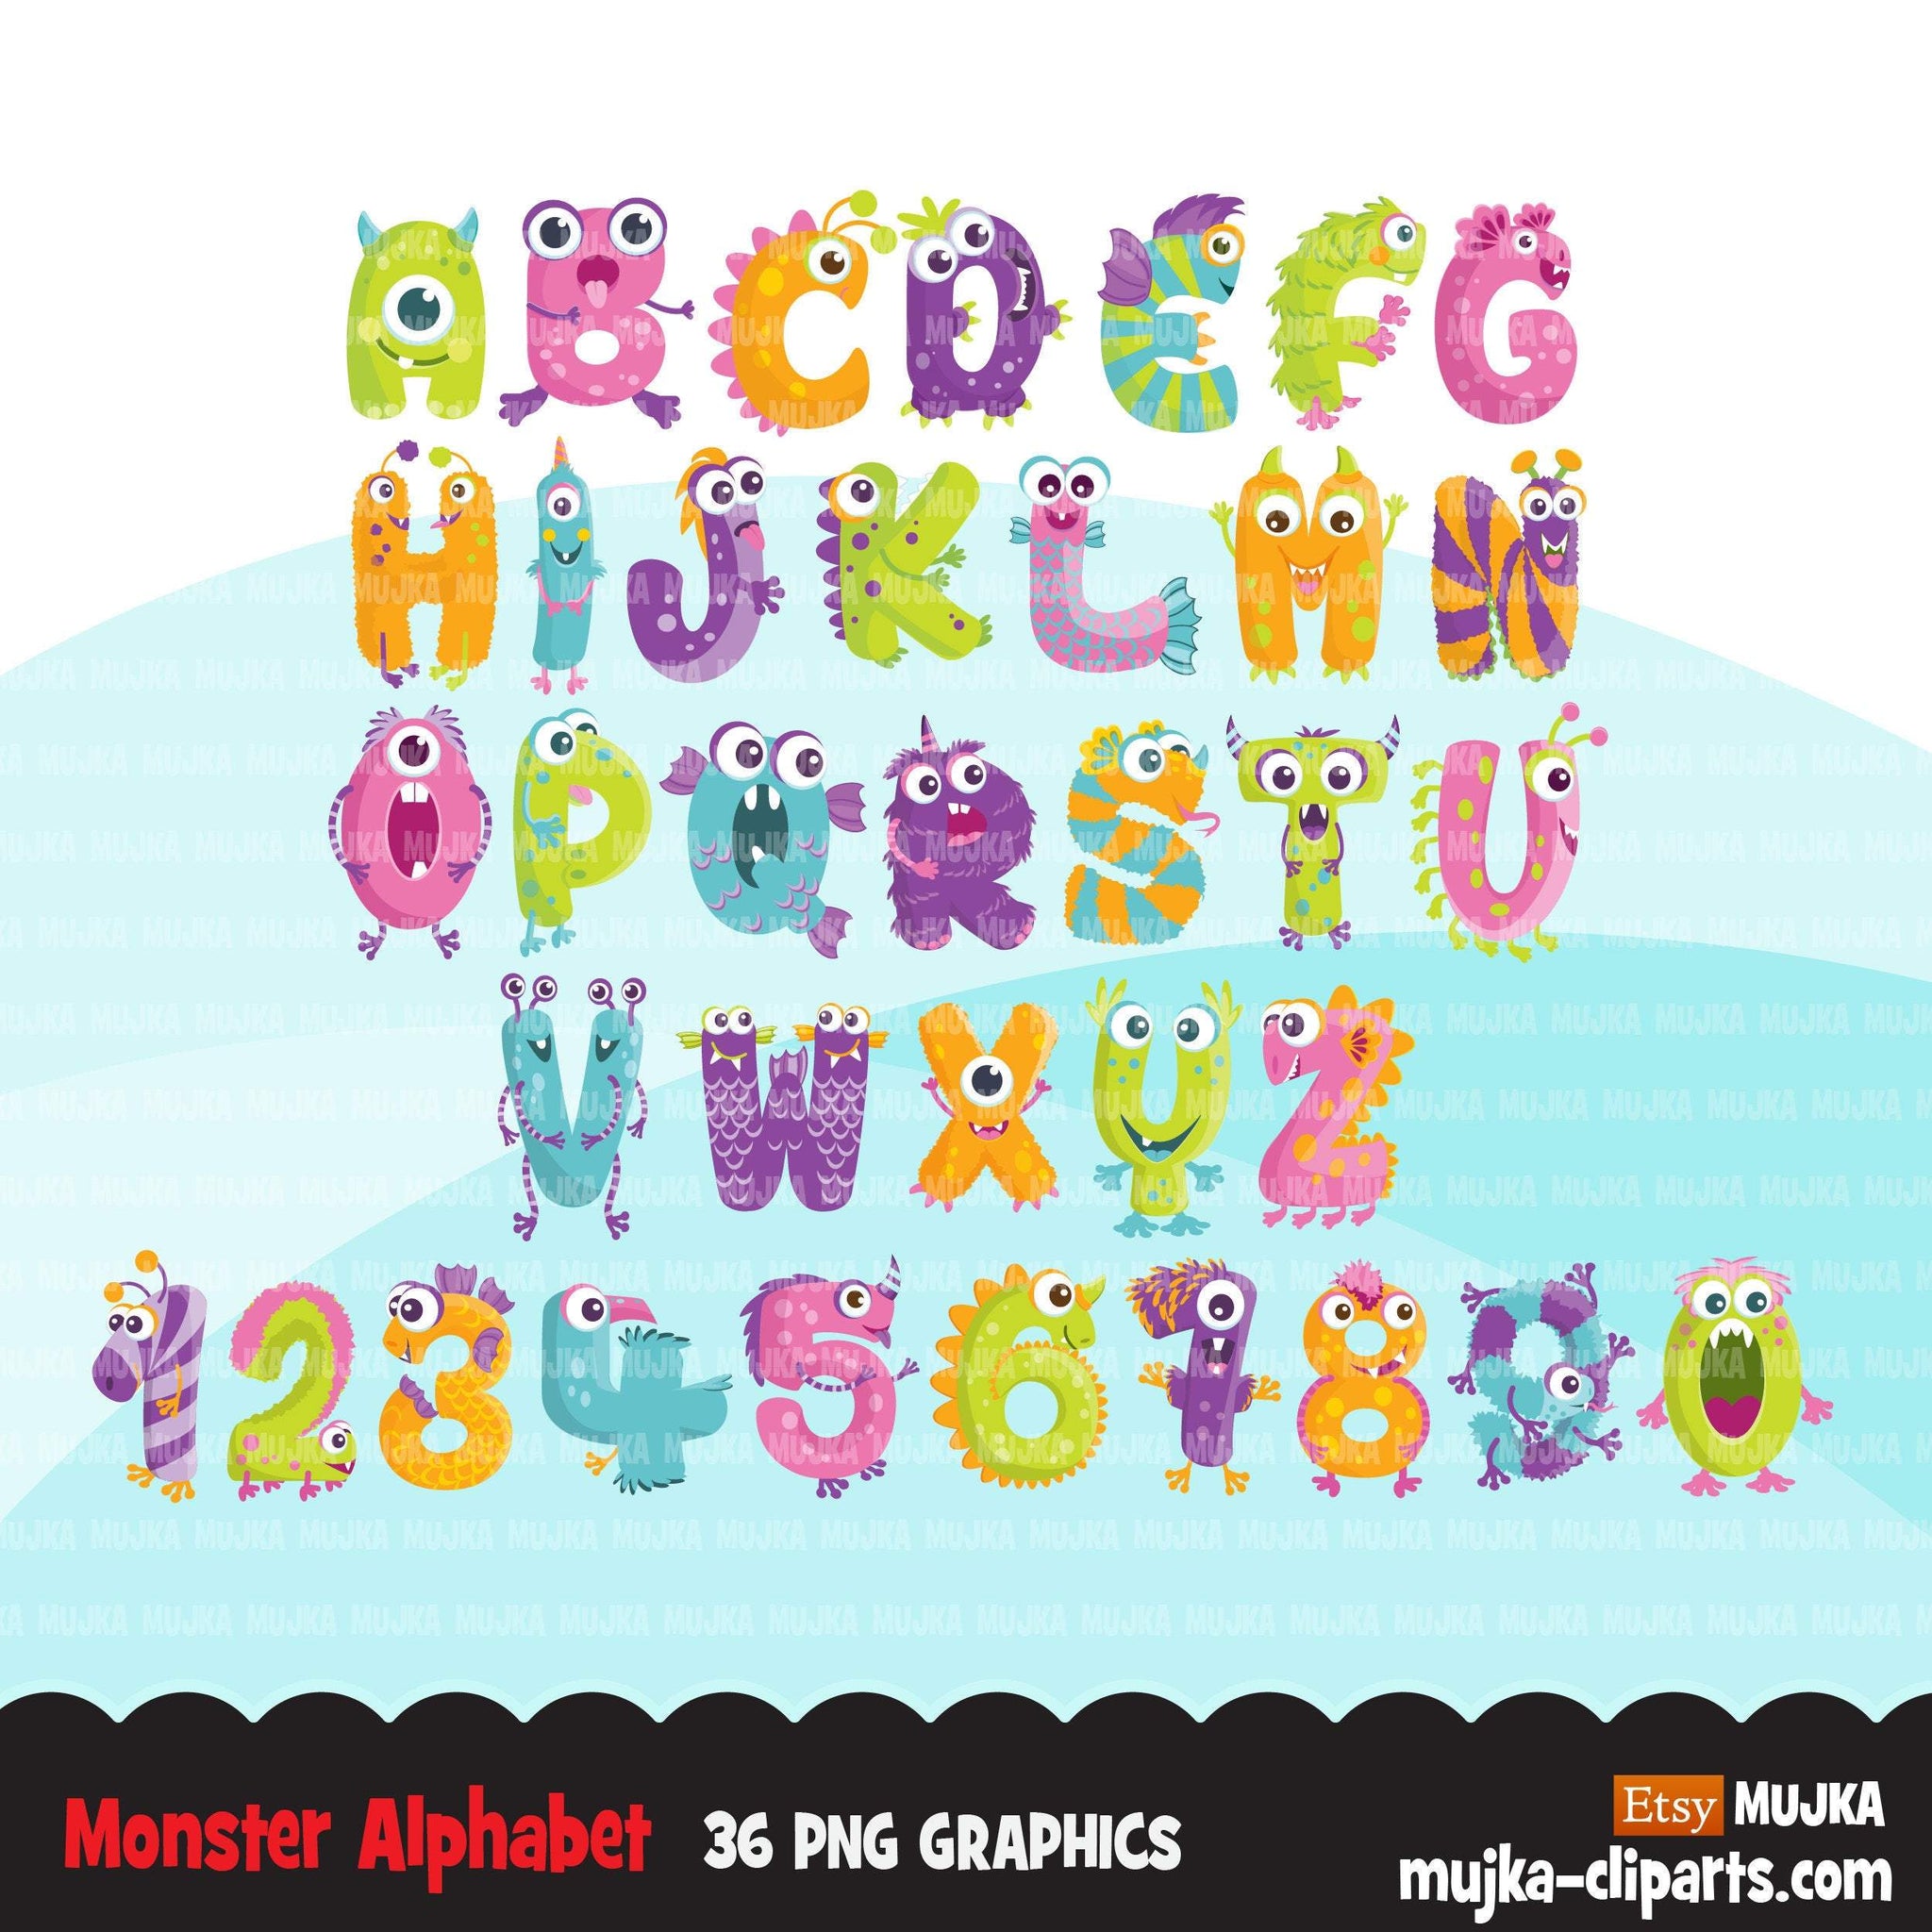 Monster Alphabet Clipart, birthday, boy girl and baby shower letters and numbers, PNG graphics